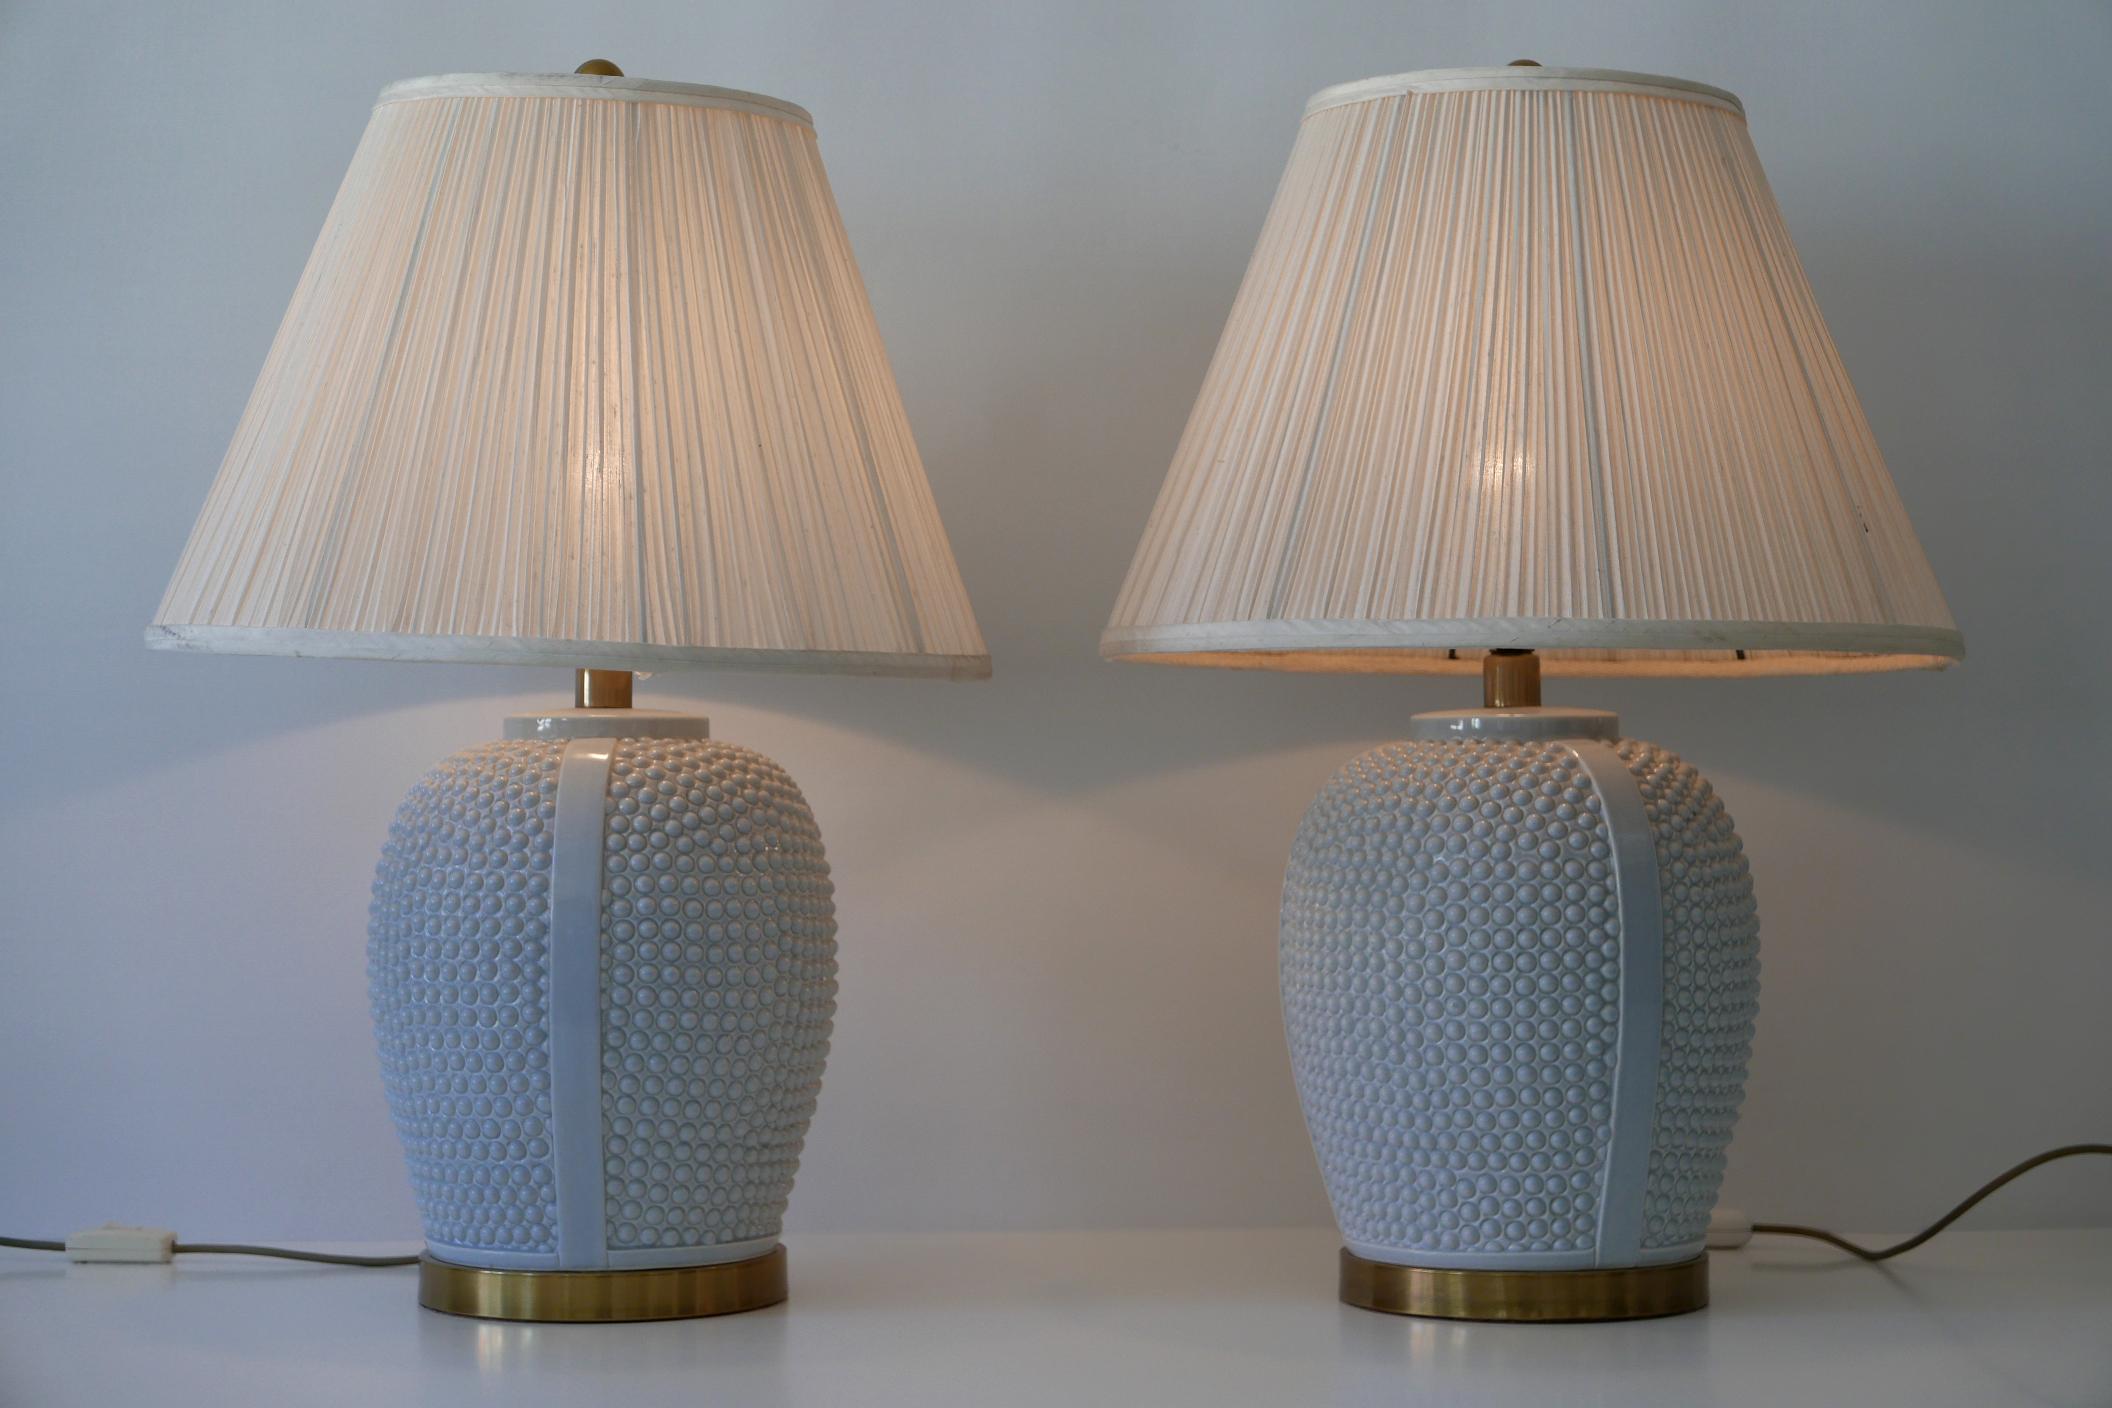 Set of two exceptional, elegant and large Mid-Century Modern ceramic table lamps. Designed and manufactured probably in 1960s, Germany.

Executed in ice-blue color glazed ceramic, brass and silk lamp shades, each lamp comes with 1 x E27 / 26 Edison